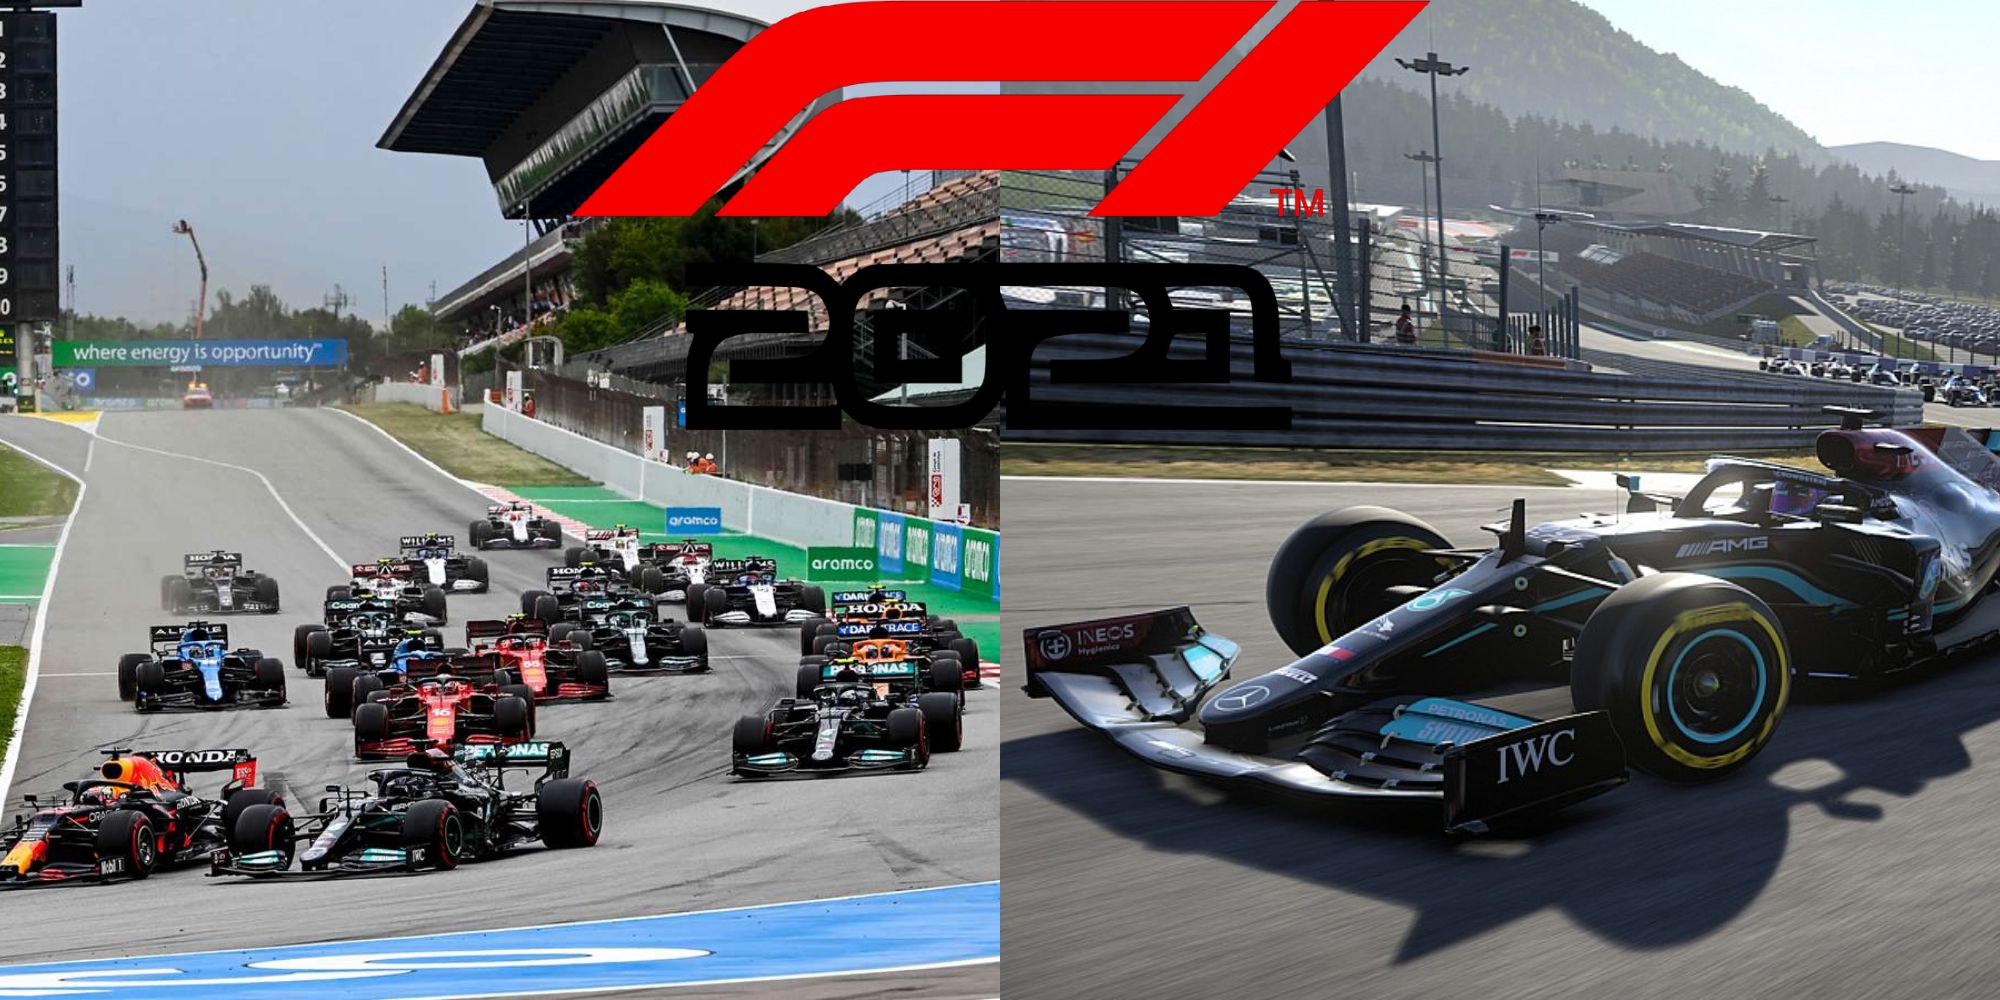 F1 2020 season: 10 things every fan should be excited for in 2020